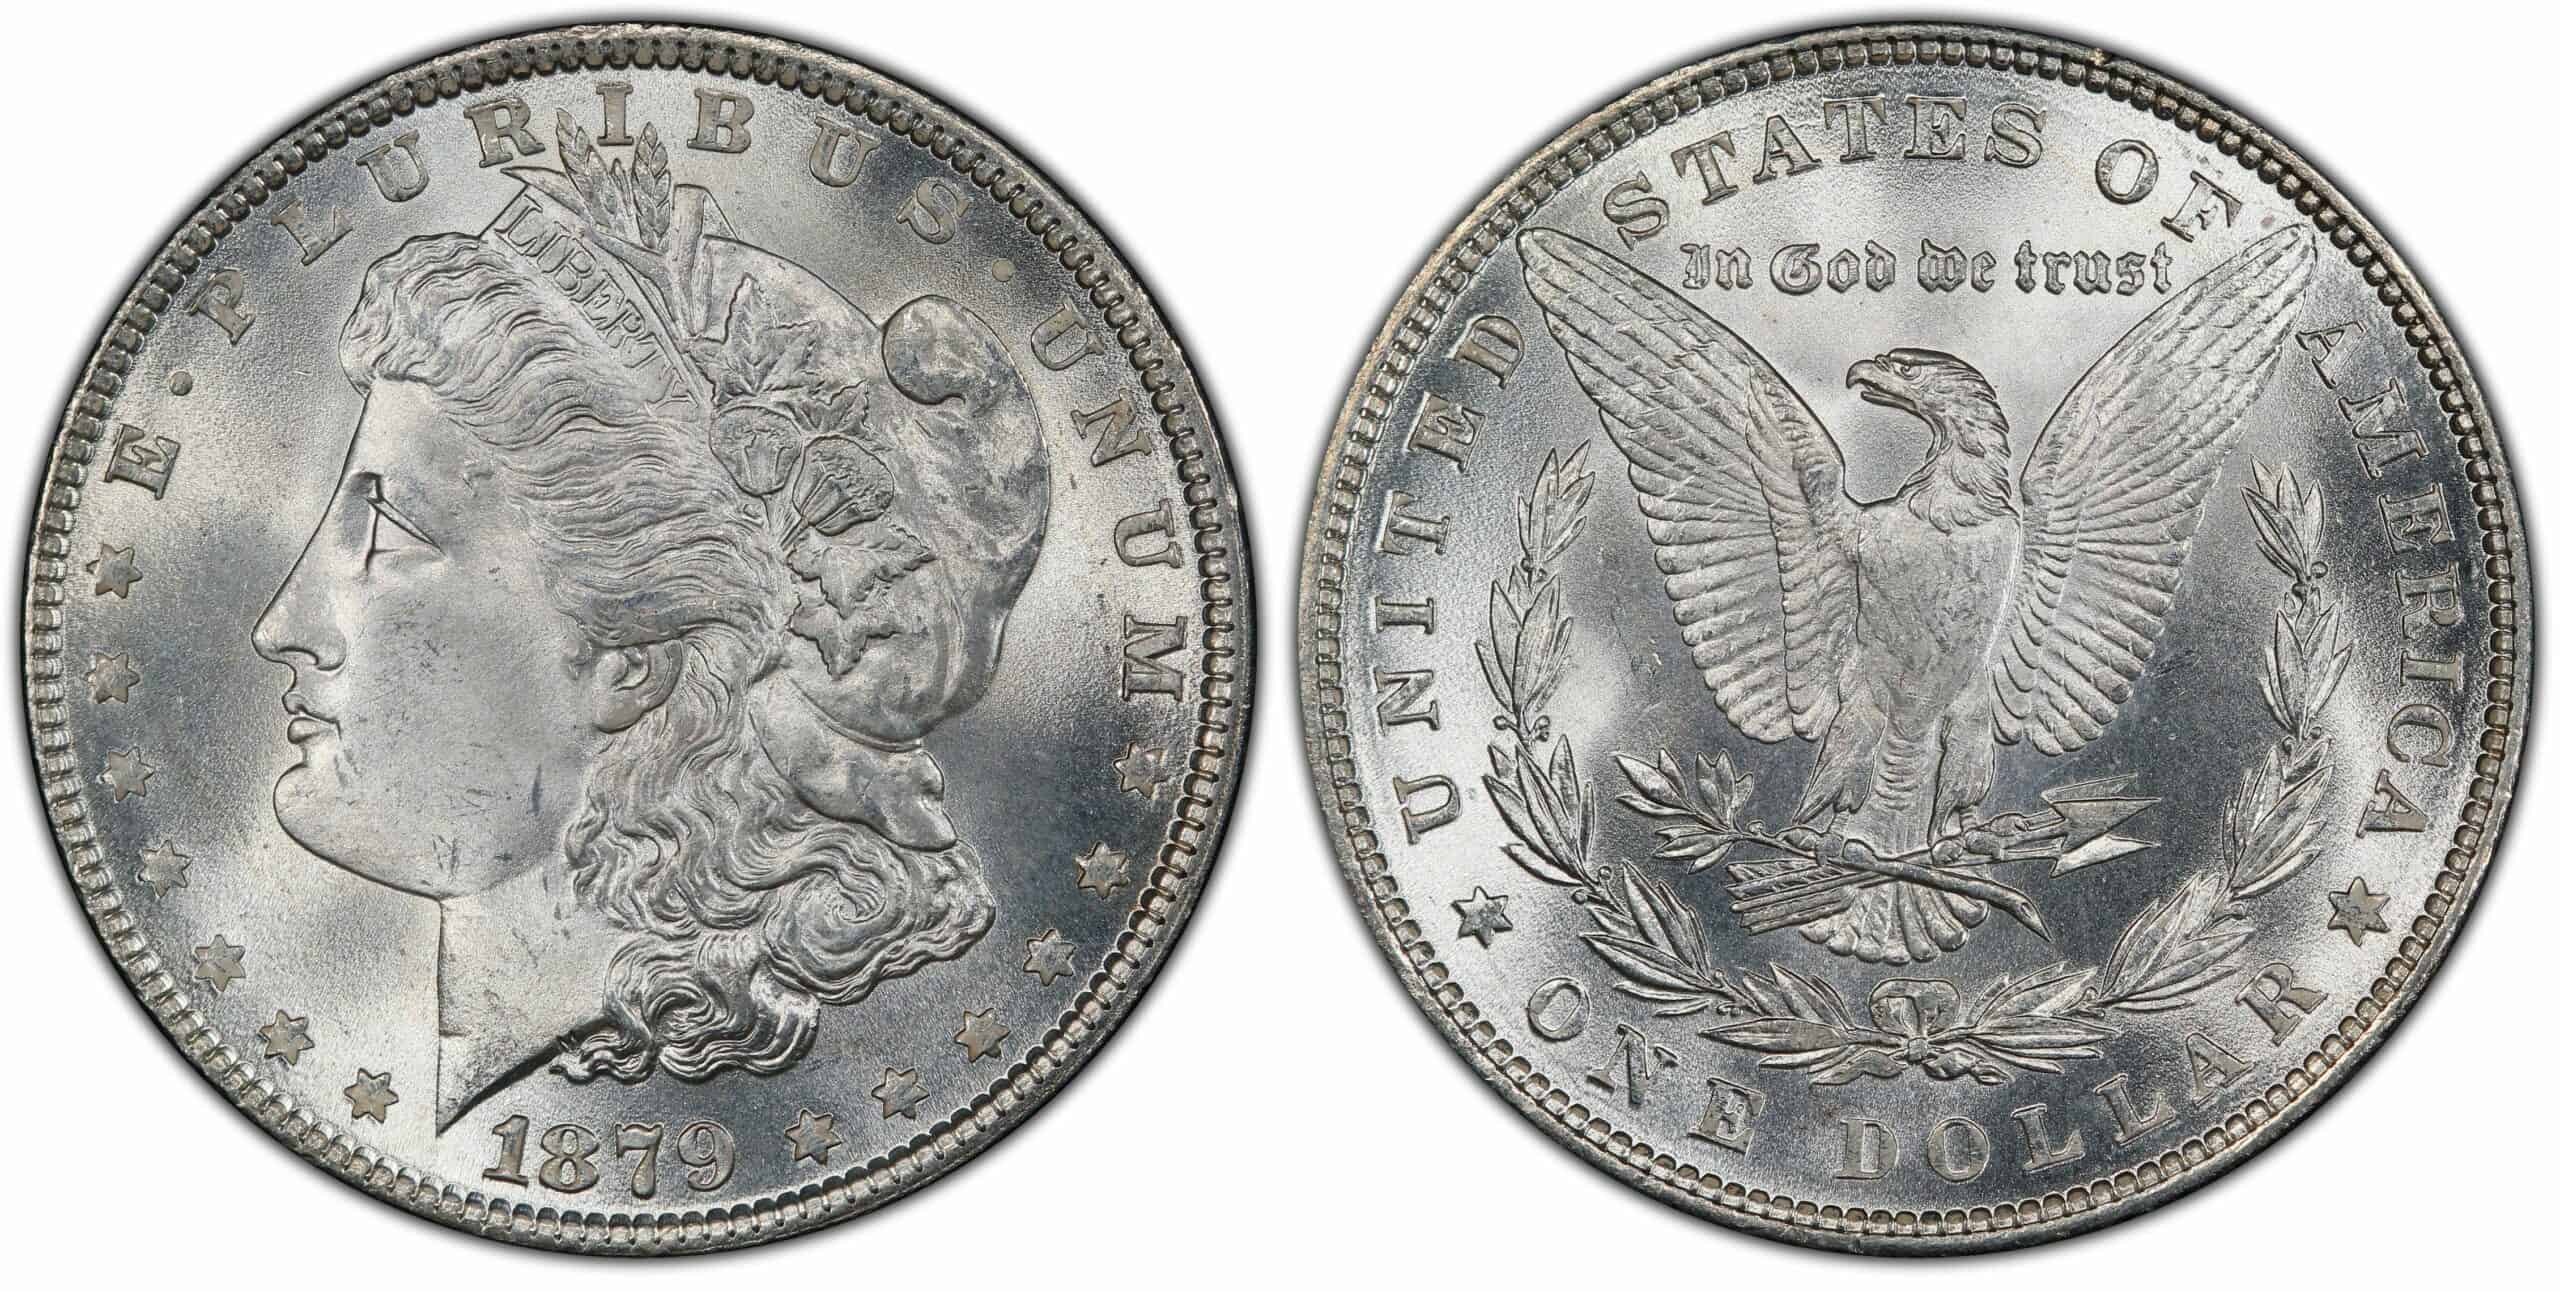 1879 Silver Dollar Value Guides (Errors, “O”, “S” and “CC” Mint Mark)